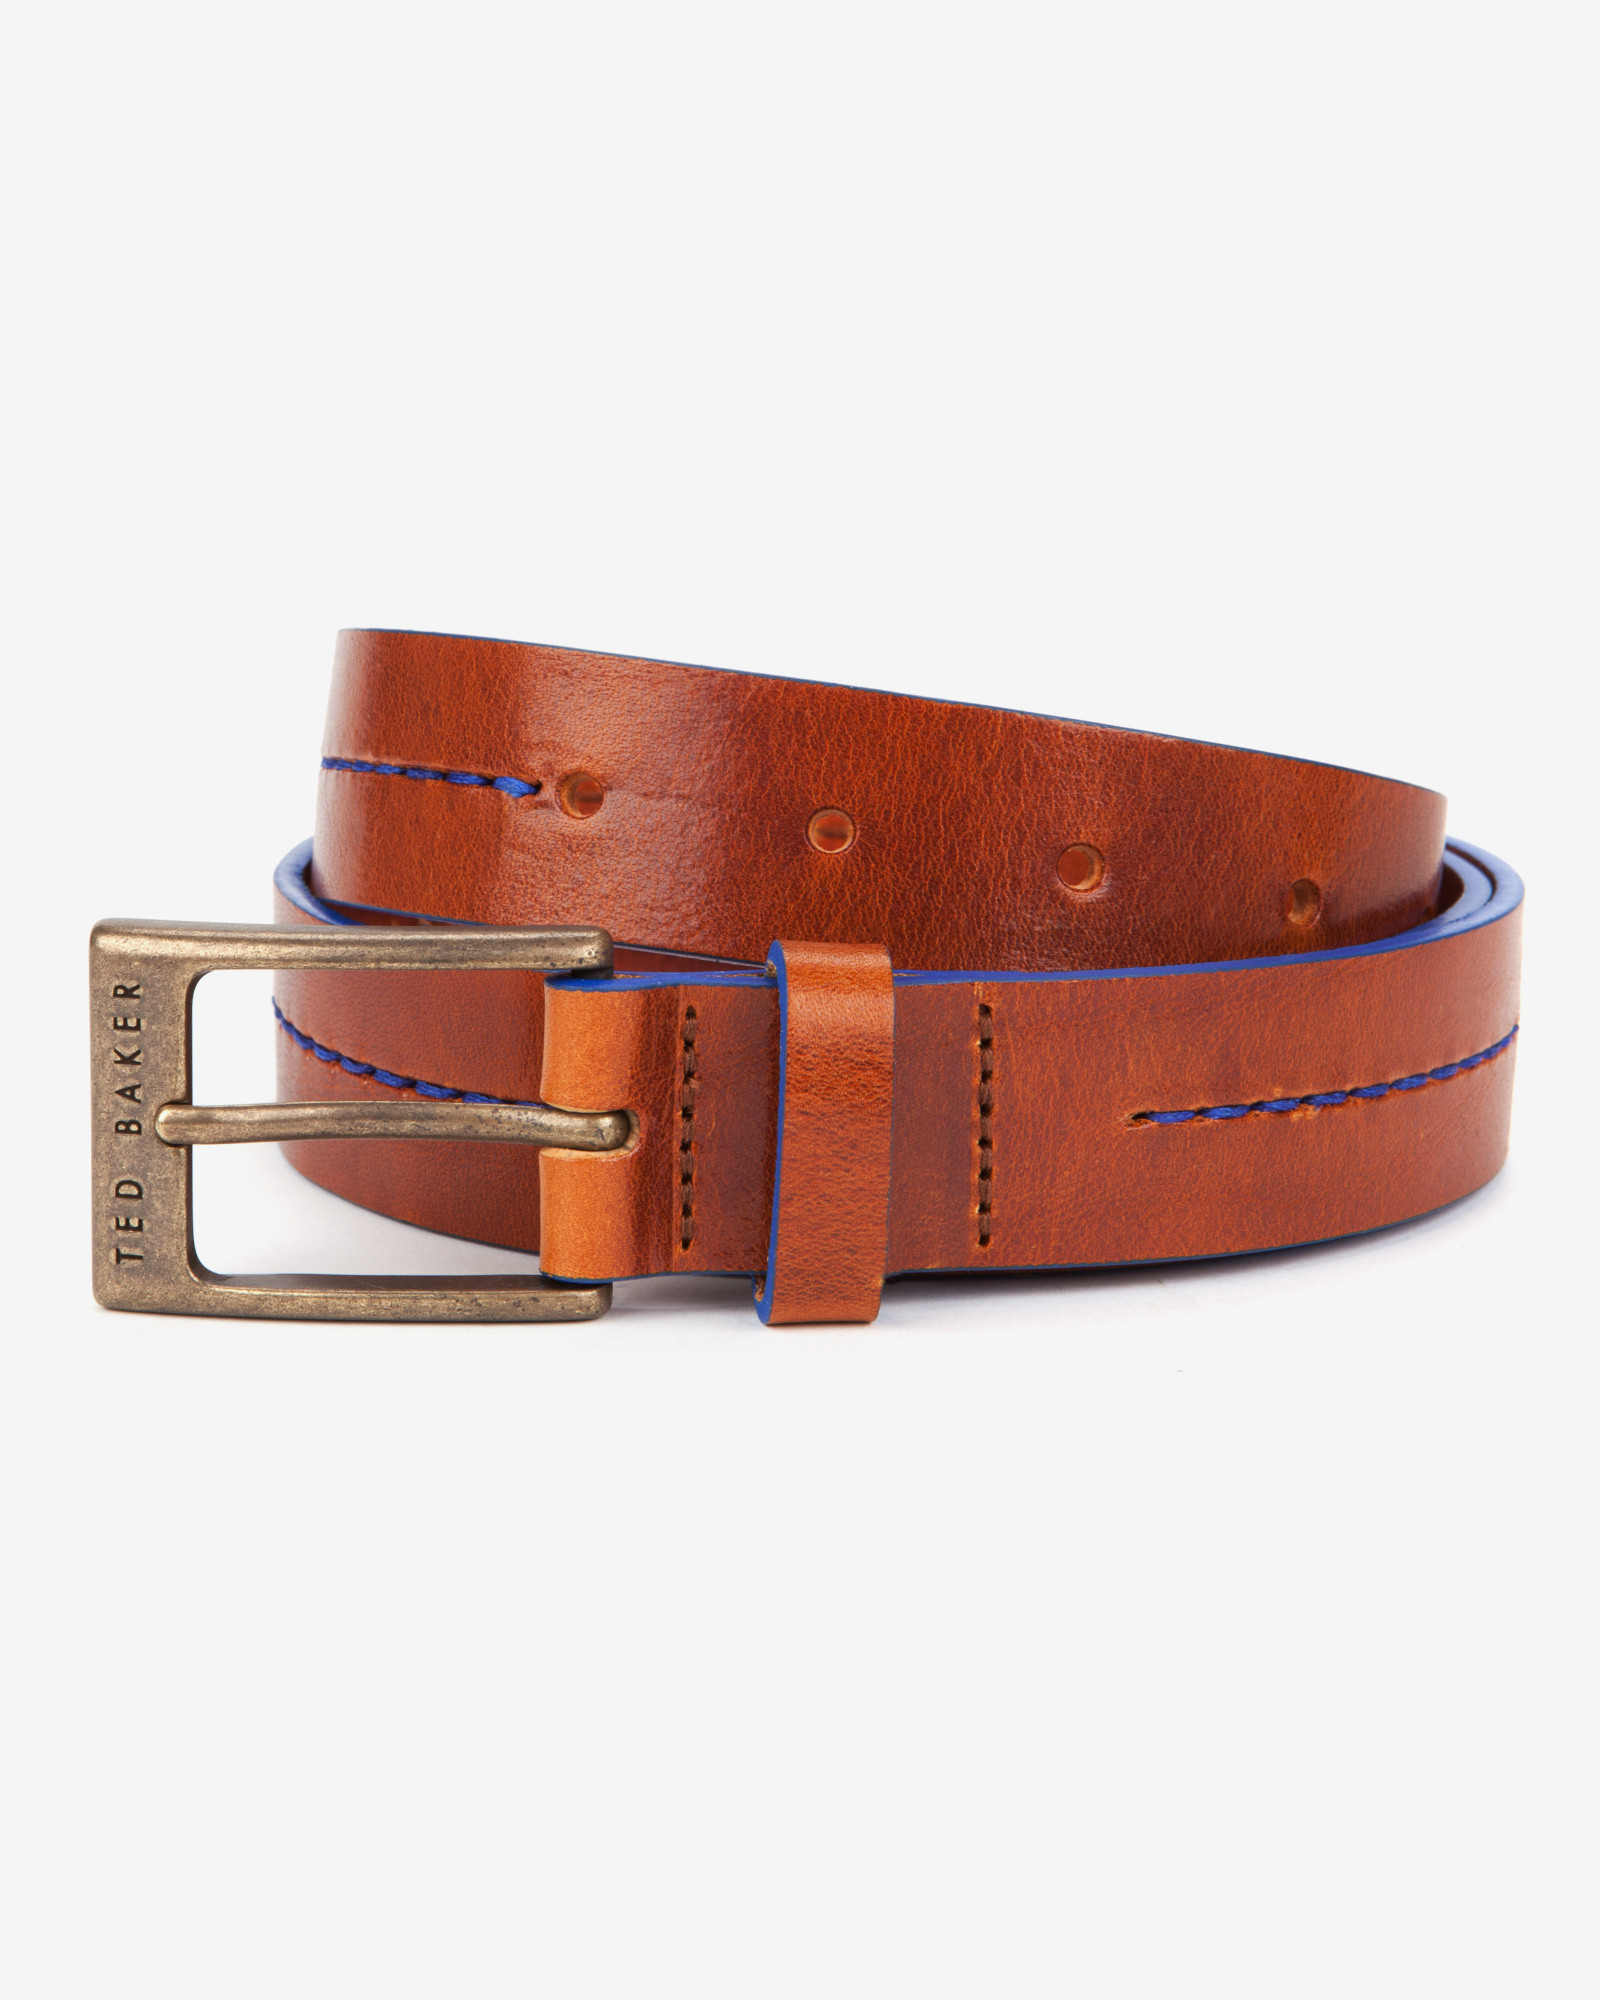 Ted Baker Stitched Leather Belt in Tan (Brown) for Men - Lyst